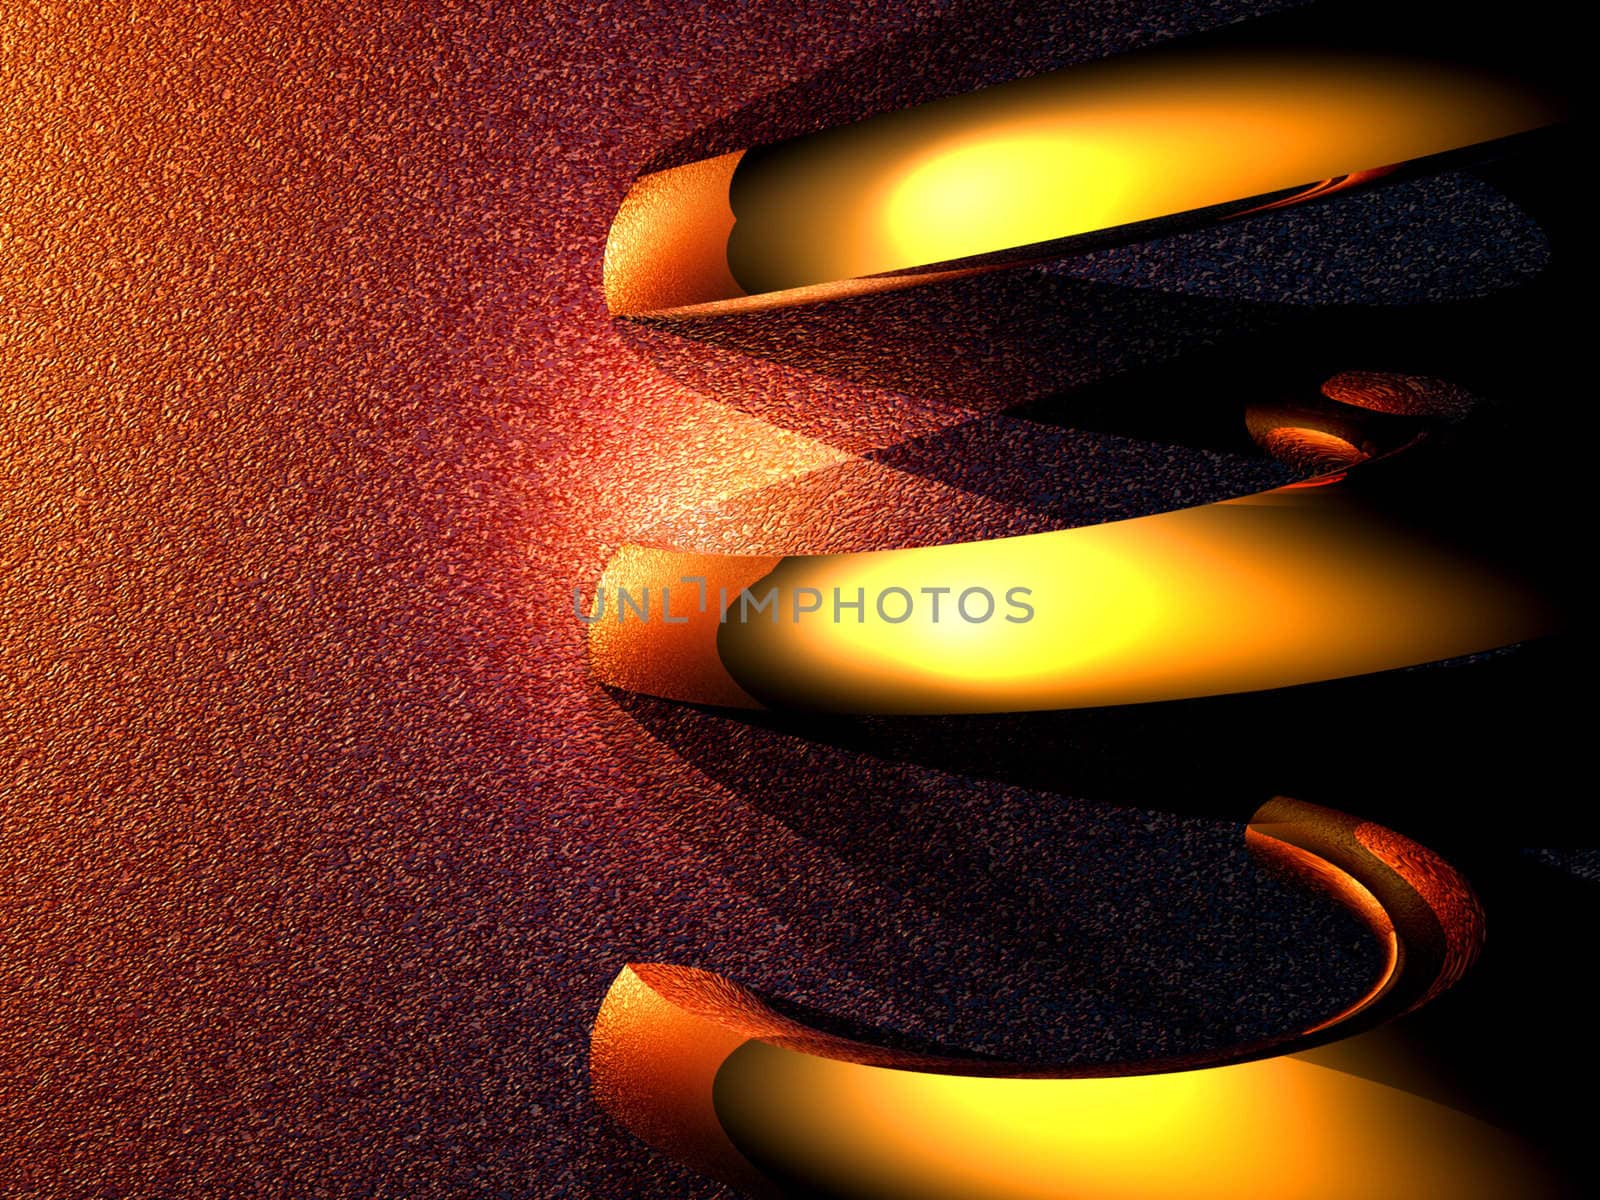 abstract fantasy image of metallic elements of design